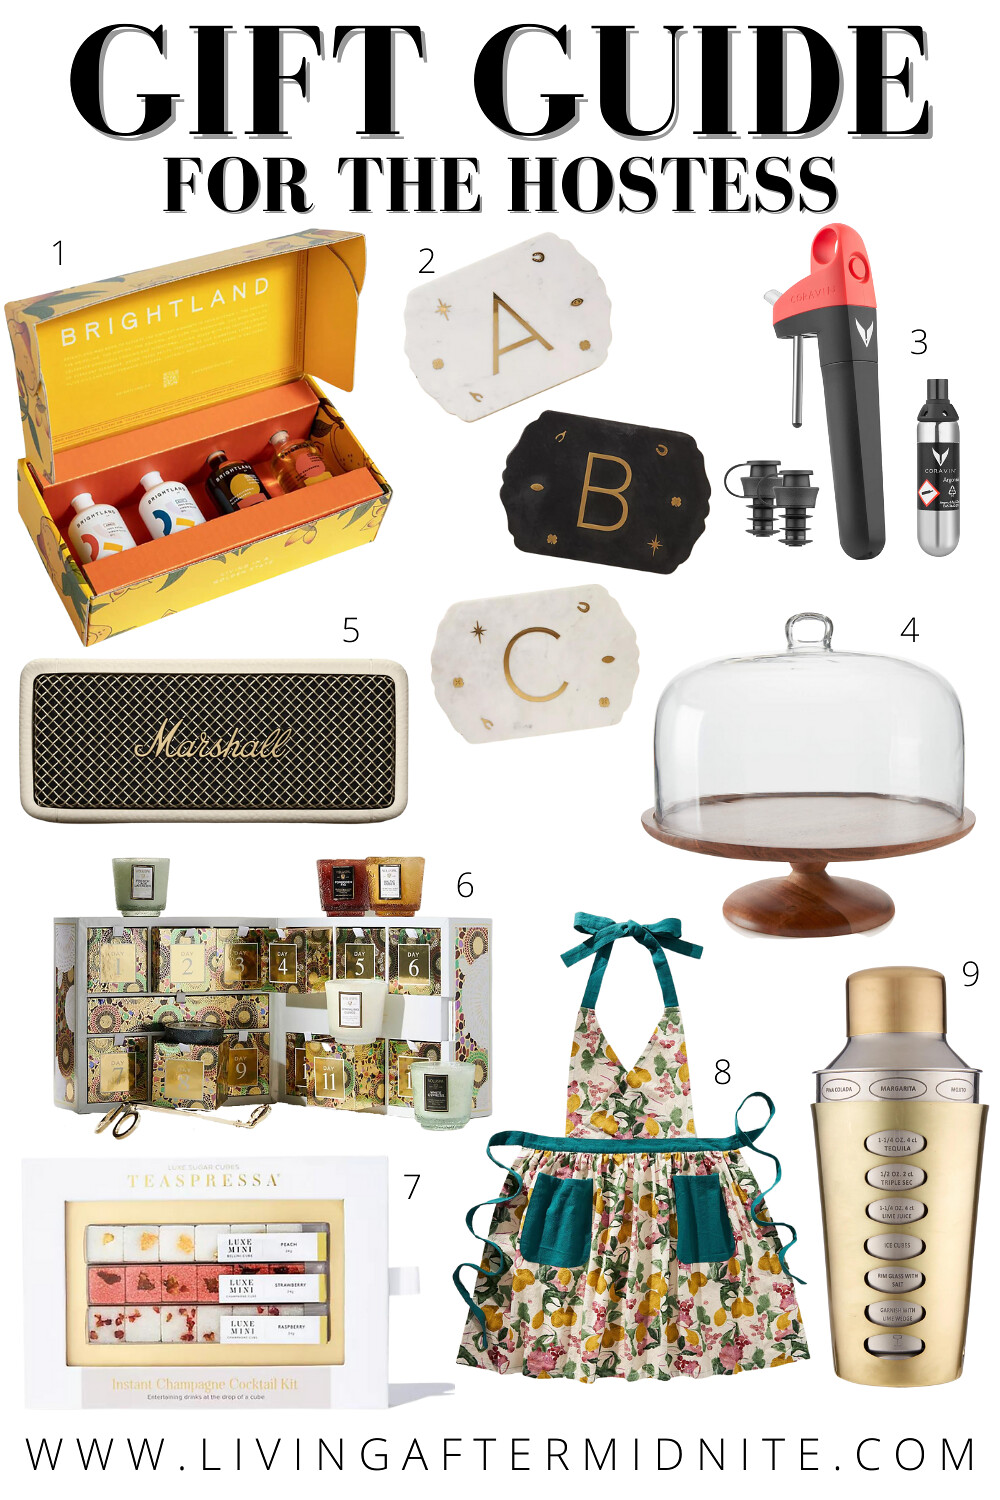 Gift Guide for the Hostess | Wife Gift Ideas | Girlfriend Gift Ideas | Ultimate Holiday Gift Guide | Christmas Presents | Hostess with the Mostess